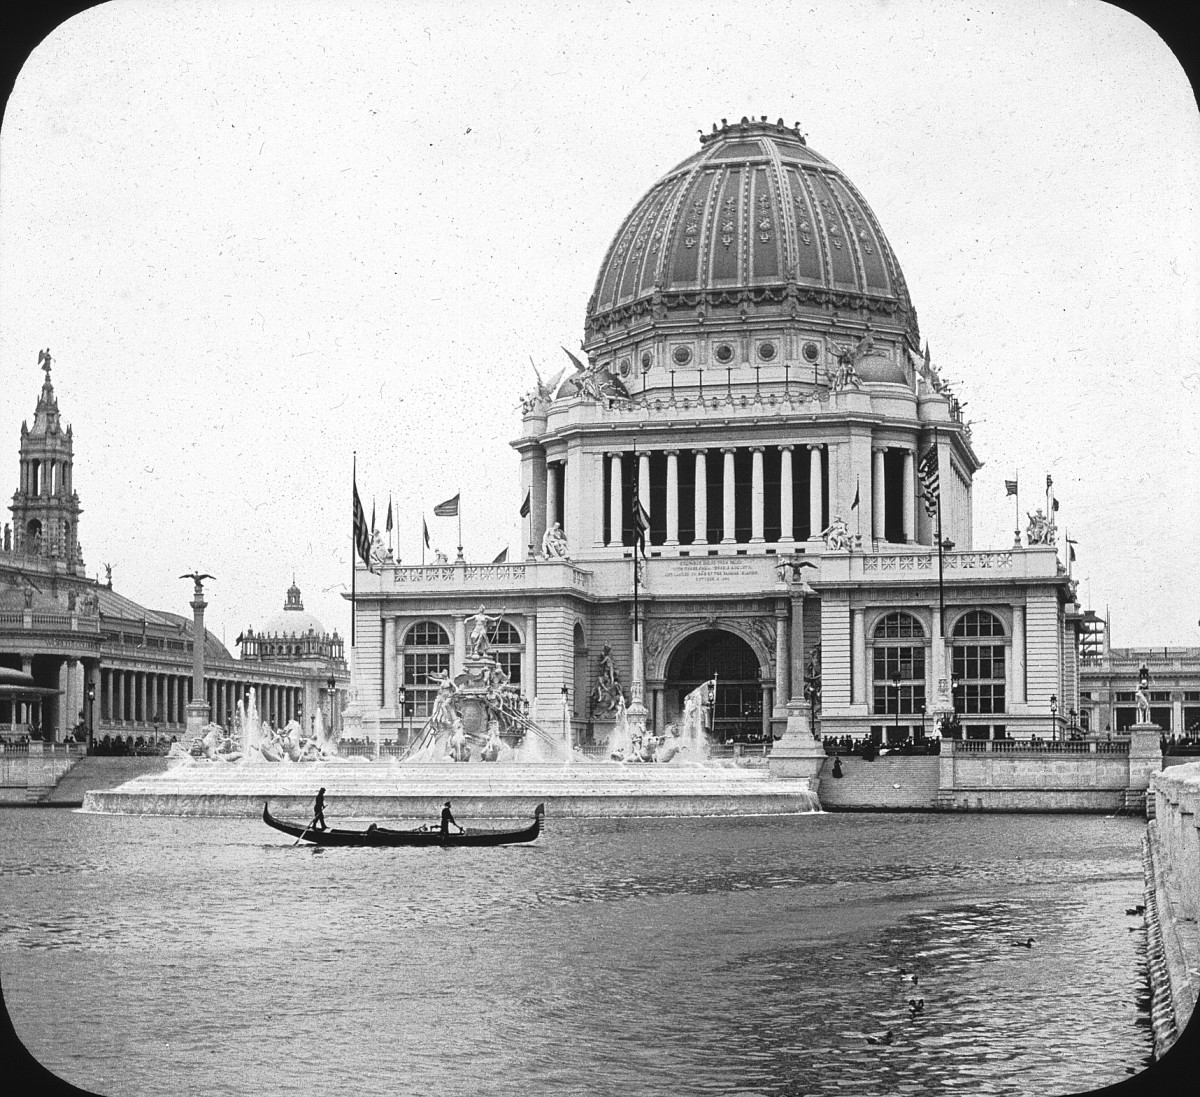 World's Columbian Exposition: Court of Honor, Chicago, United States, 1893. Brooklyn Museum.